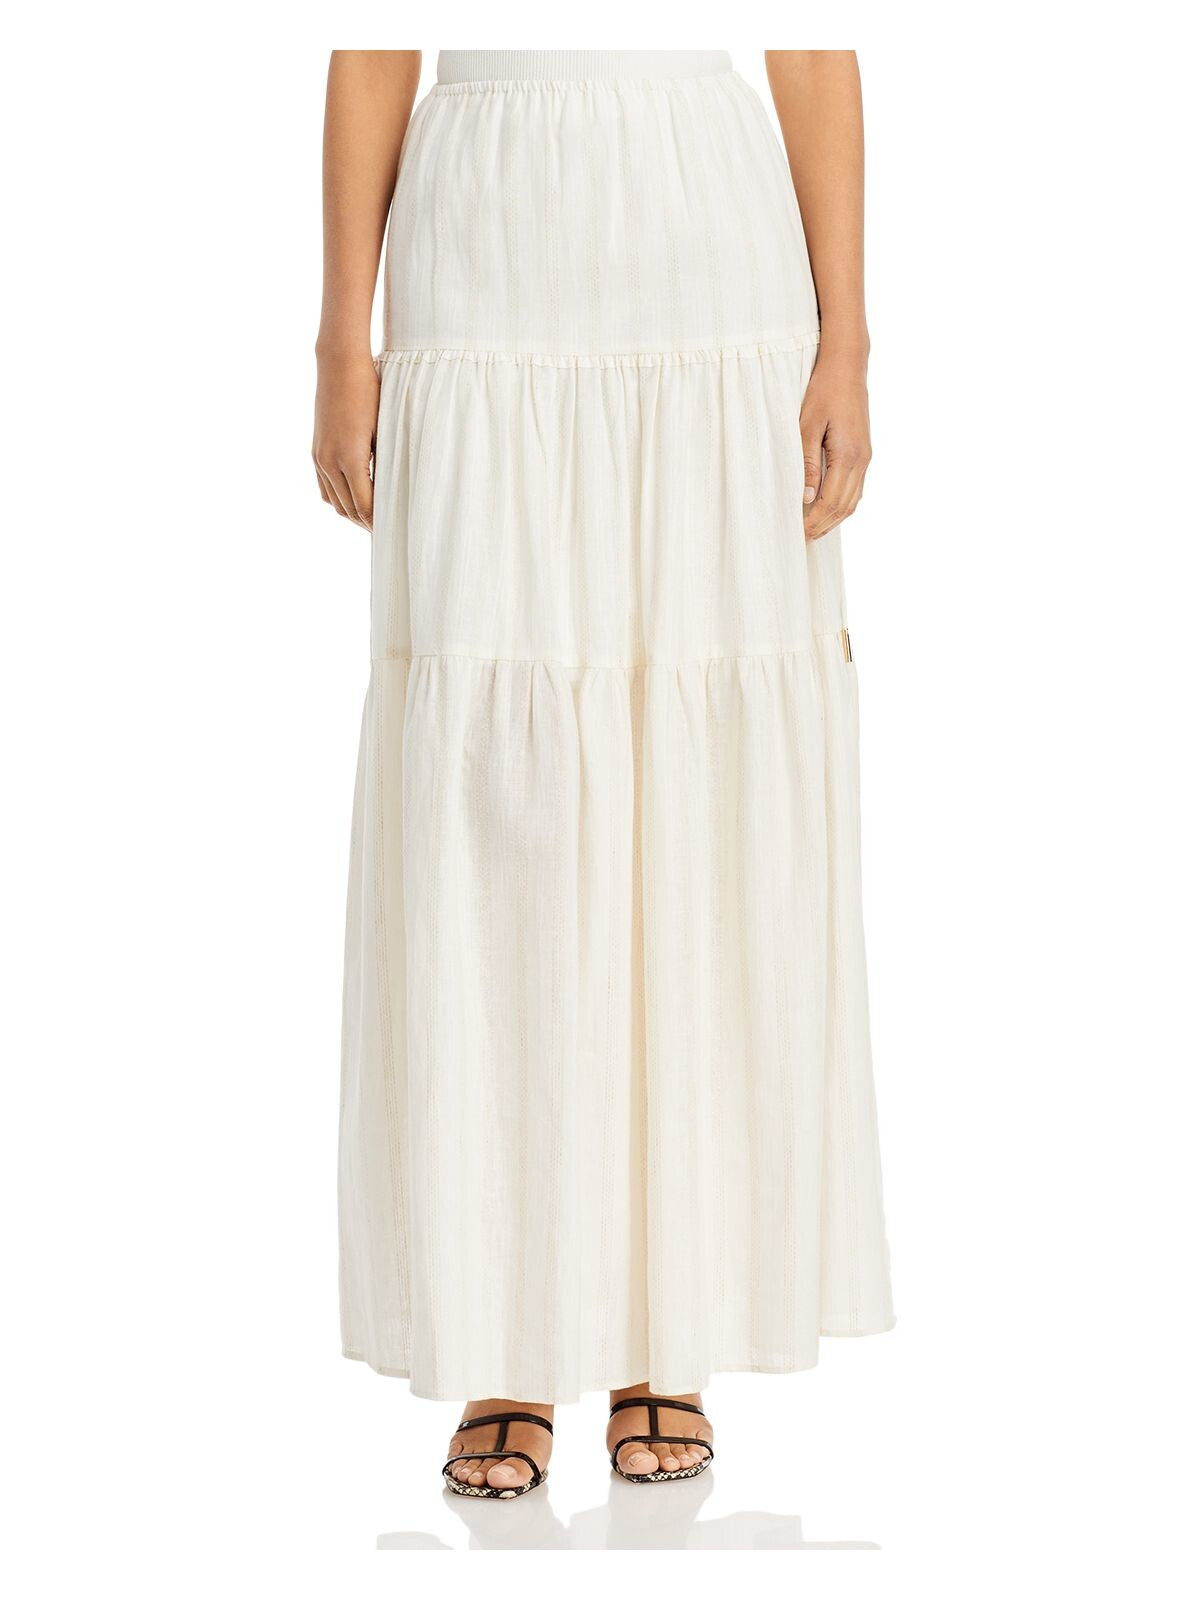 SIGNIFICANT OTHER Womens Ivory Tie Maxi Skirt 2